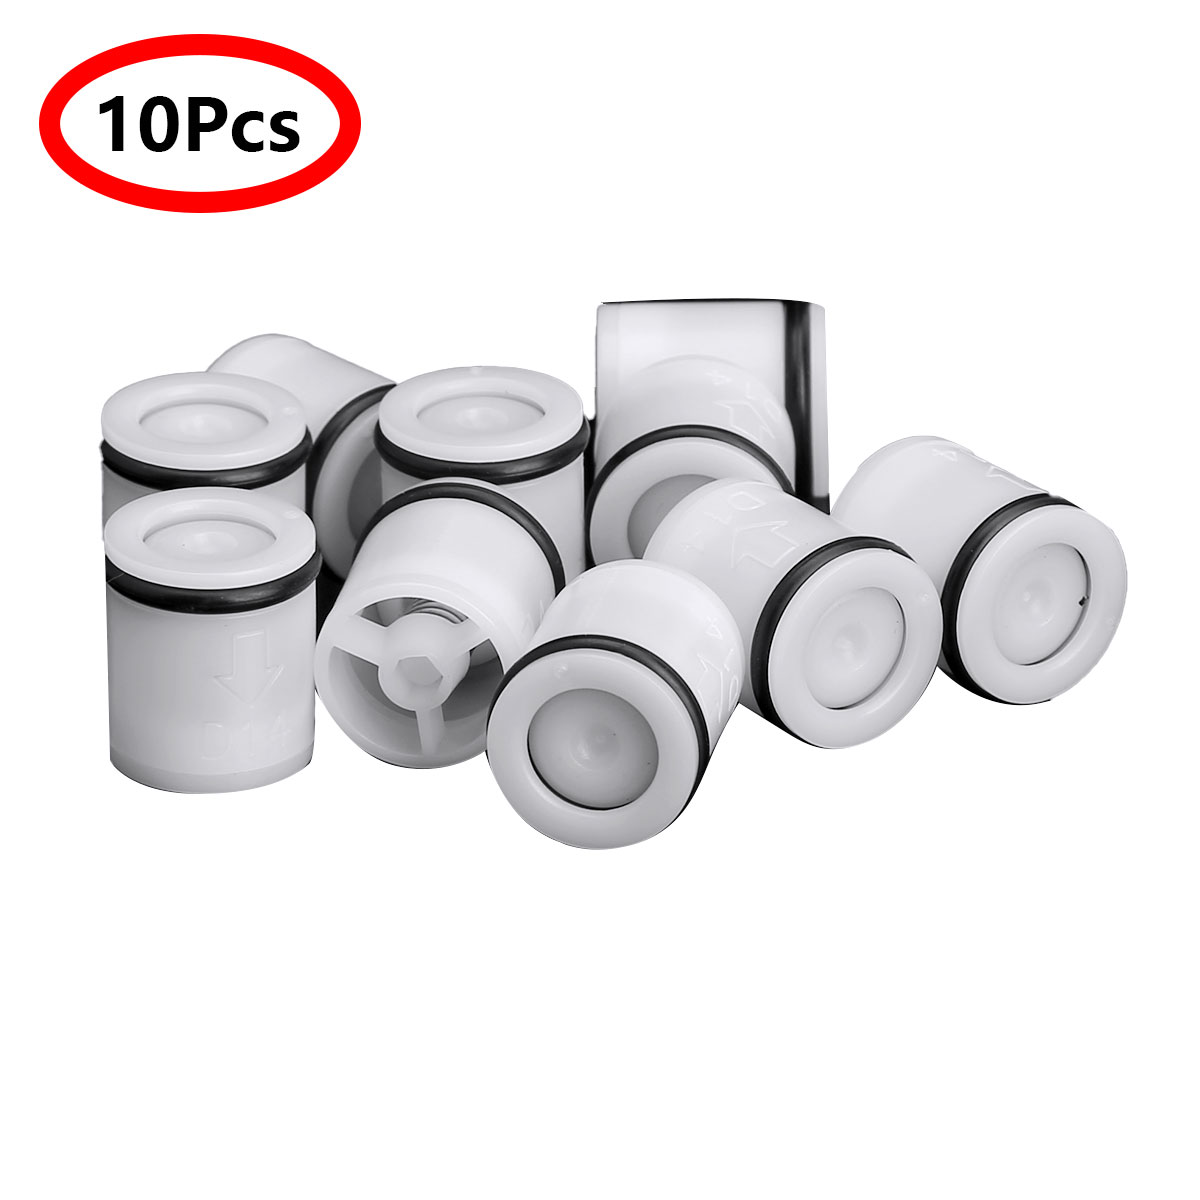 10Pcs Plastic Shower Check Valves Faucets Filters Check Valve Water Heater Control Connector Garden Kitchen Bathroom Accessory